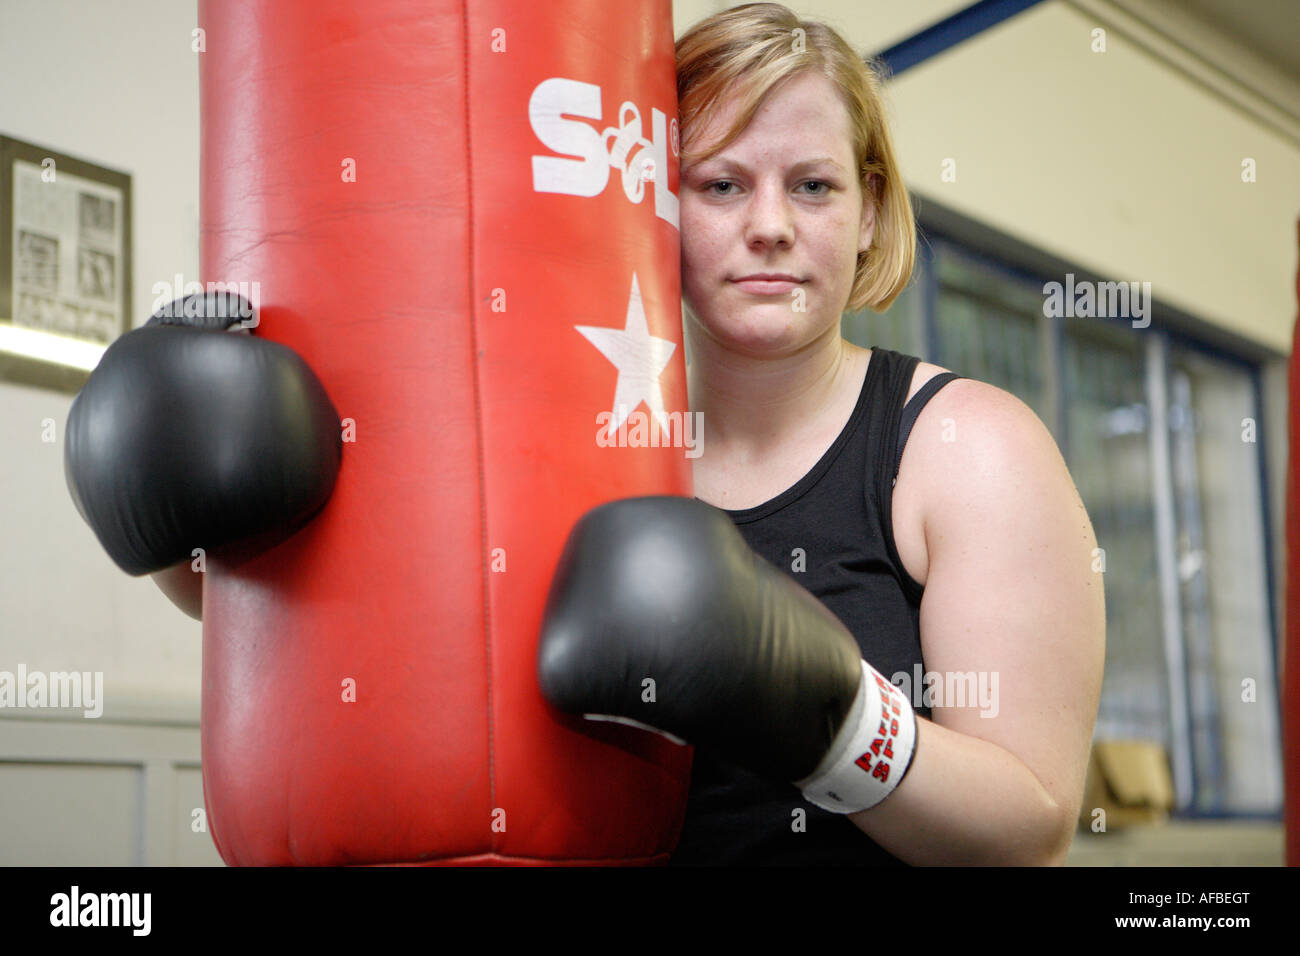 Nicole Altwicker in the Duesseldorfer youth punching centre Stock Photo